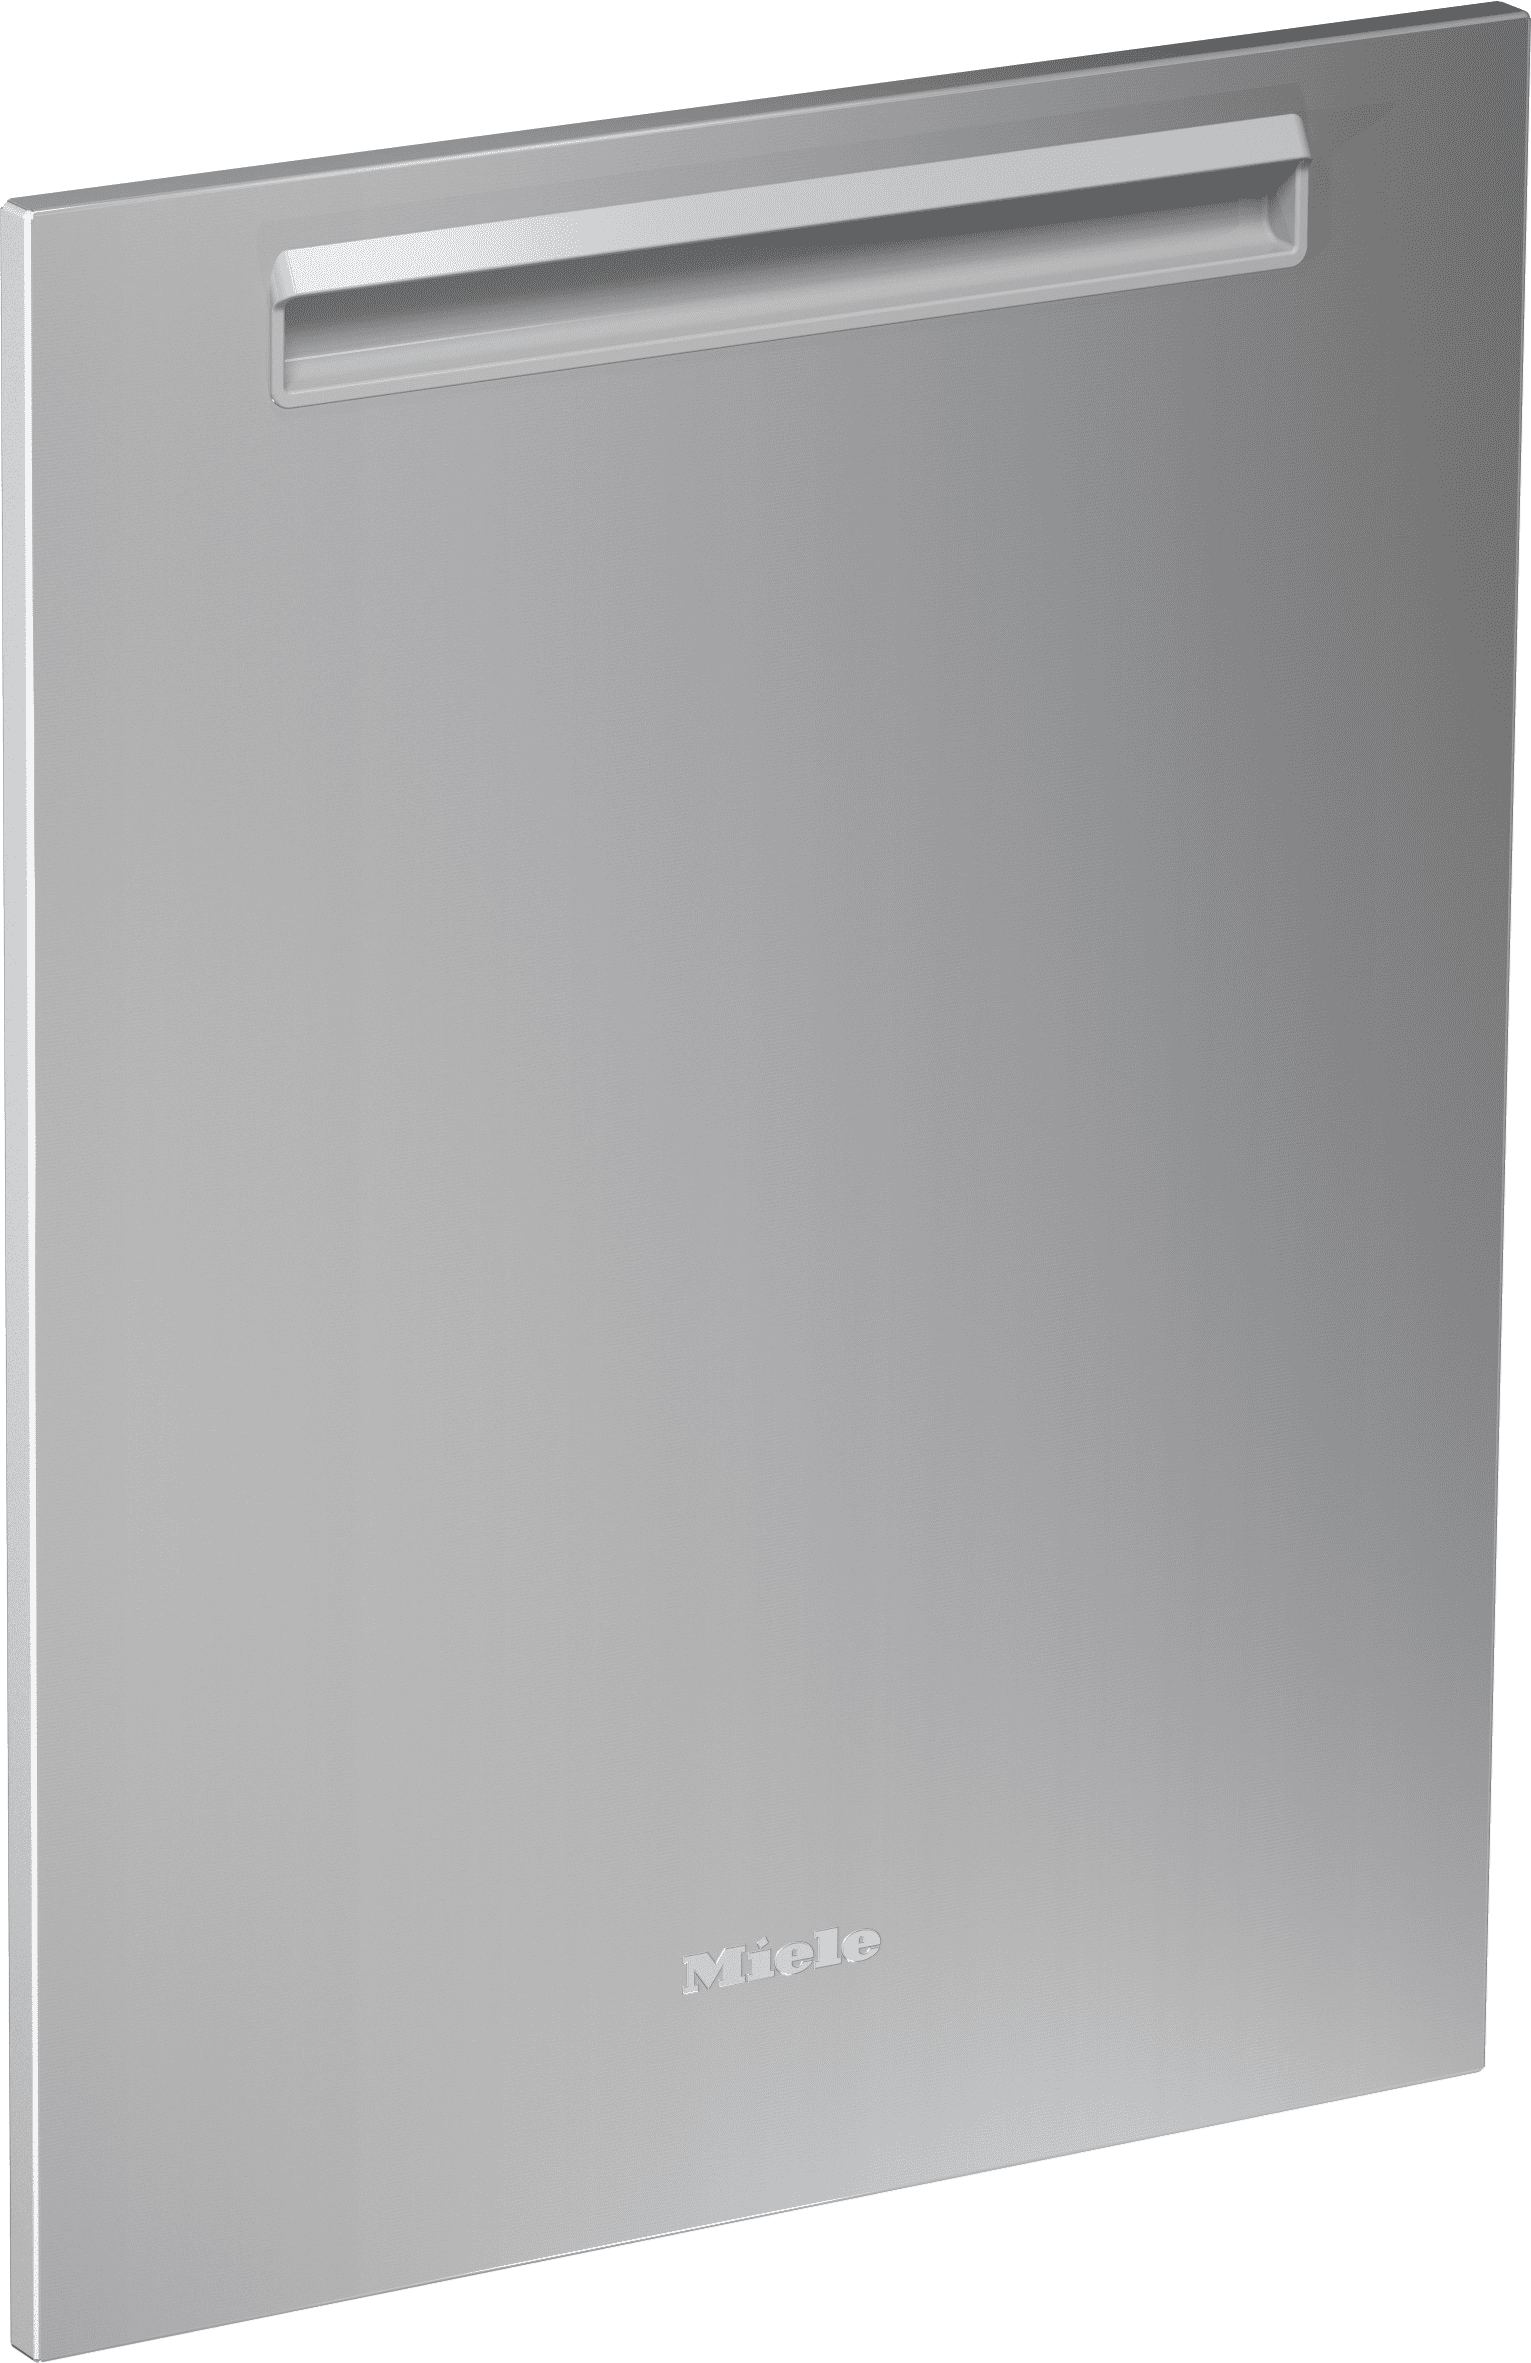 Miele GFVI70977 Gfvi 709/77 - Int. Front Panel: W X H, 24 X 30 In Contourline Design For Fully Integrated Dishwashers.